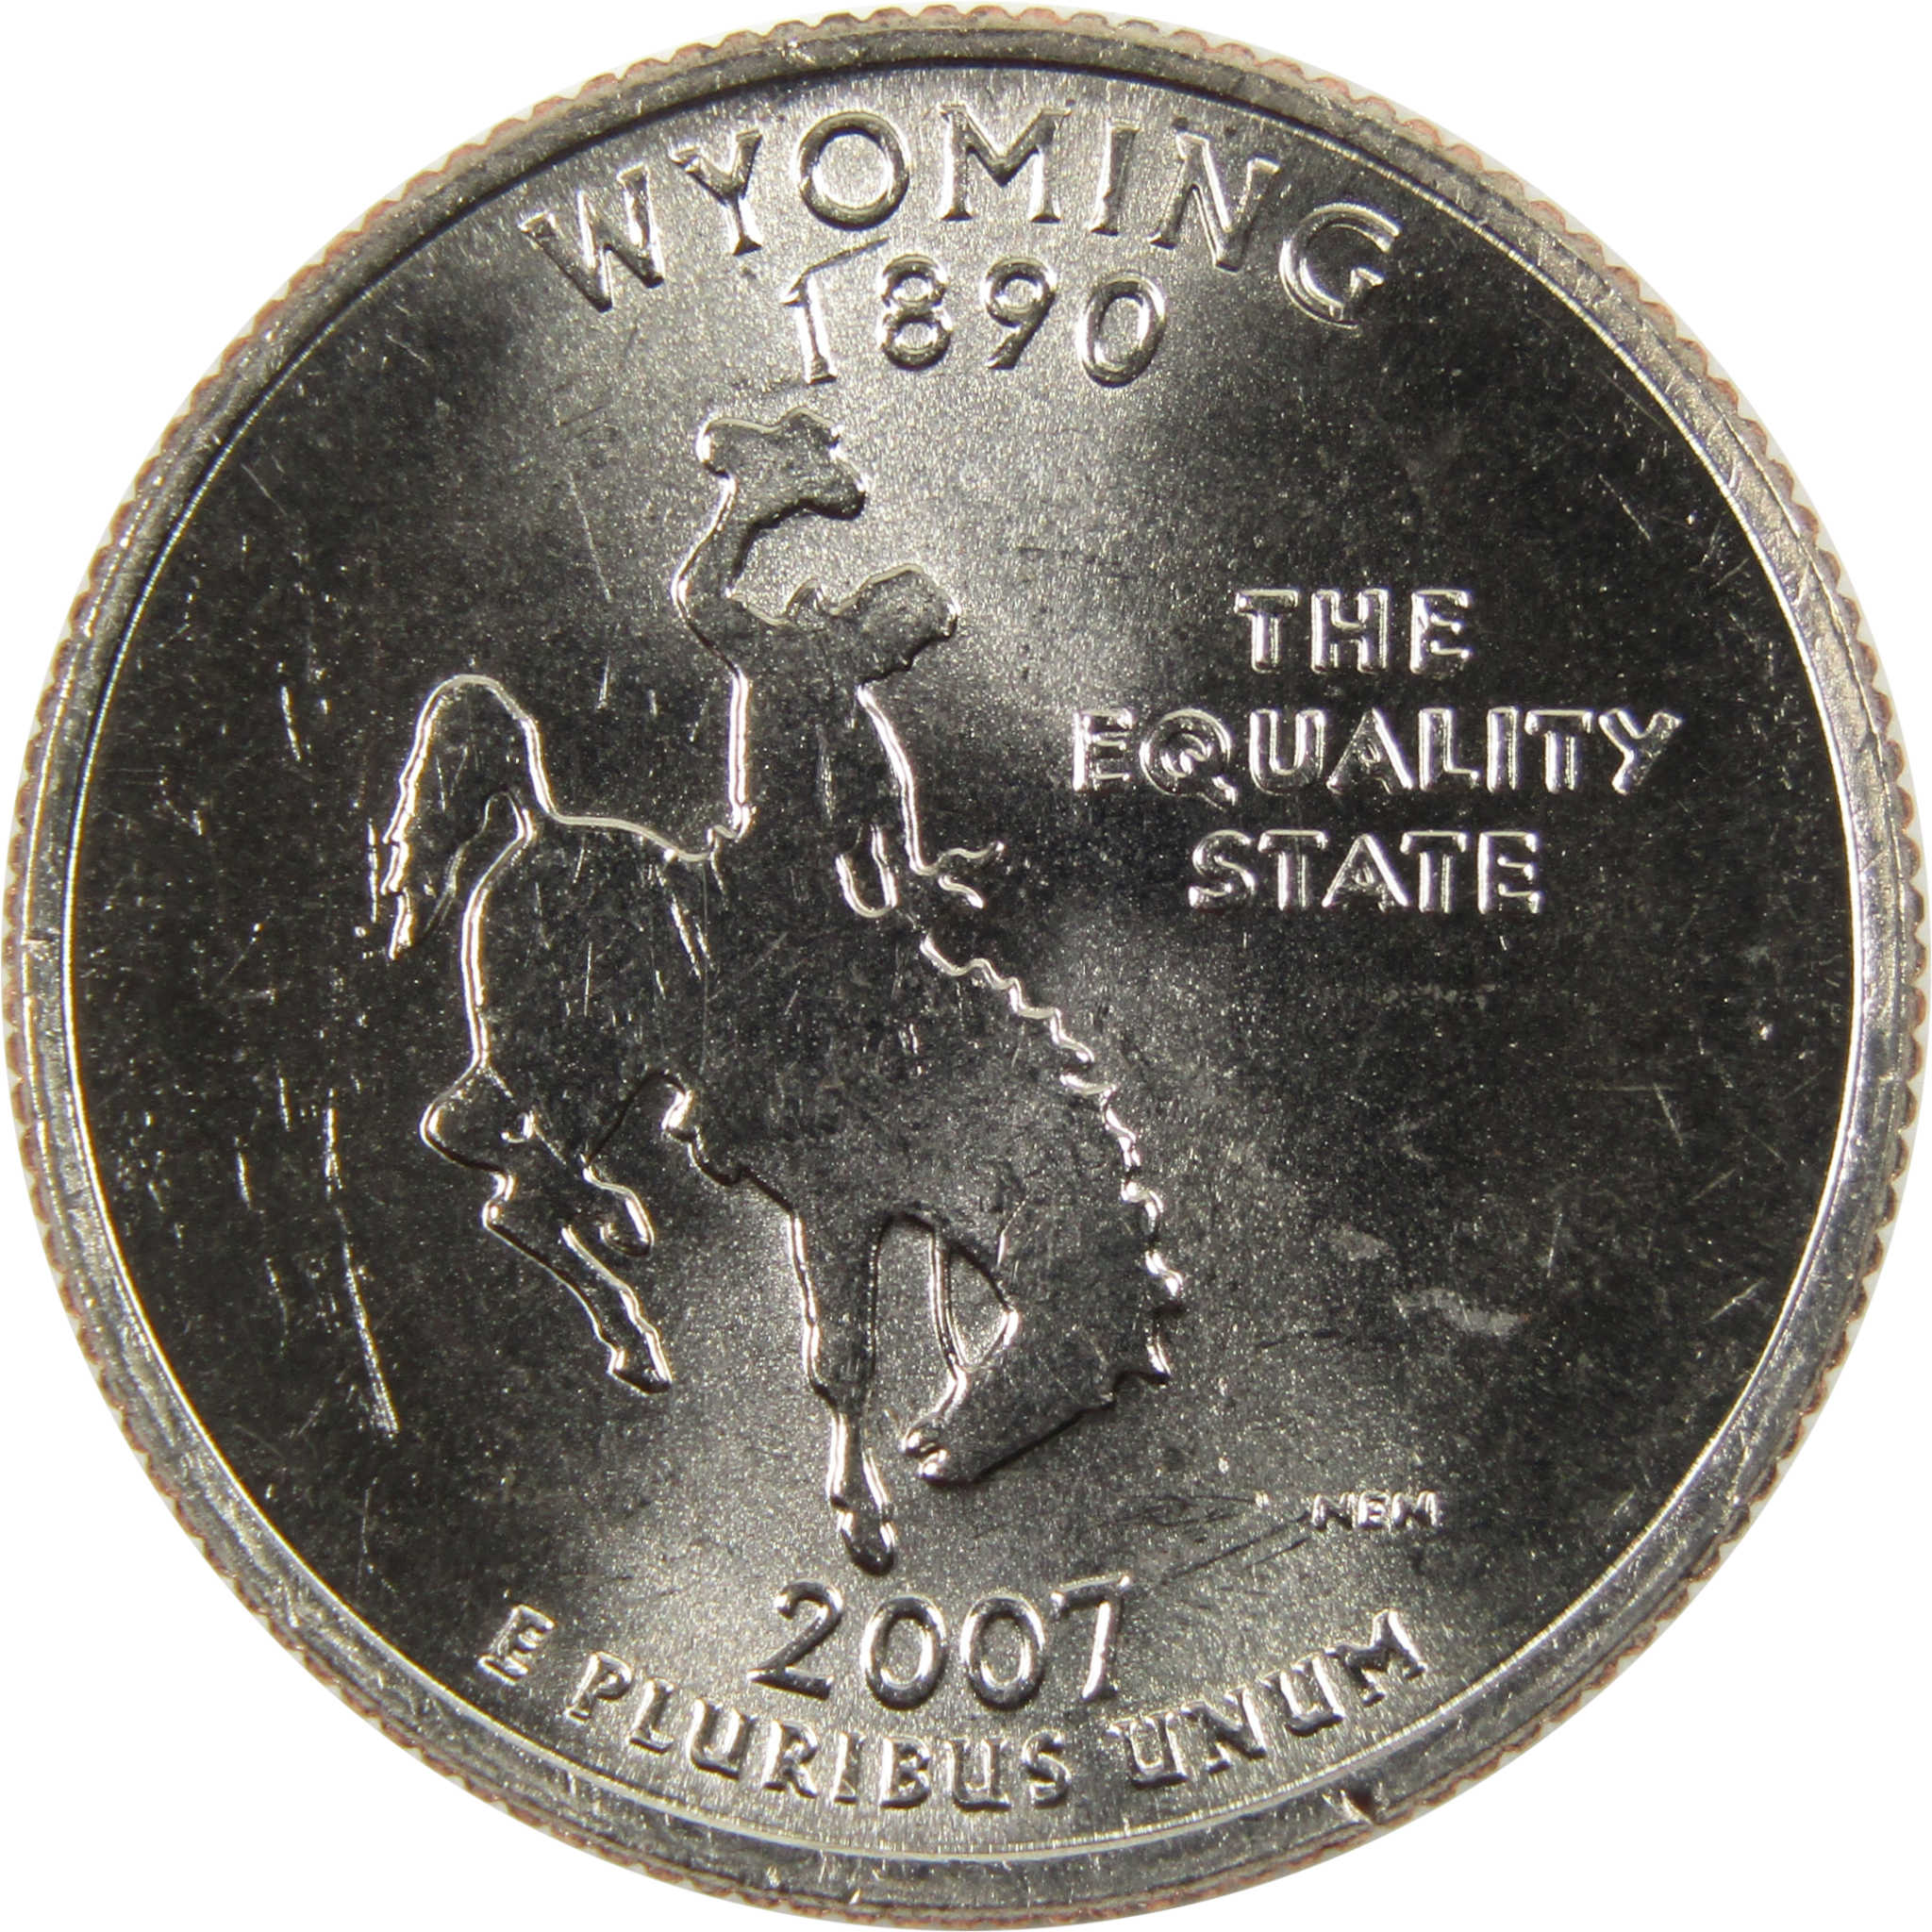 2007 D Wyoming State Quarter BU Uncirculated Clad 25c Coin